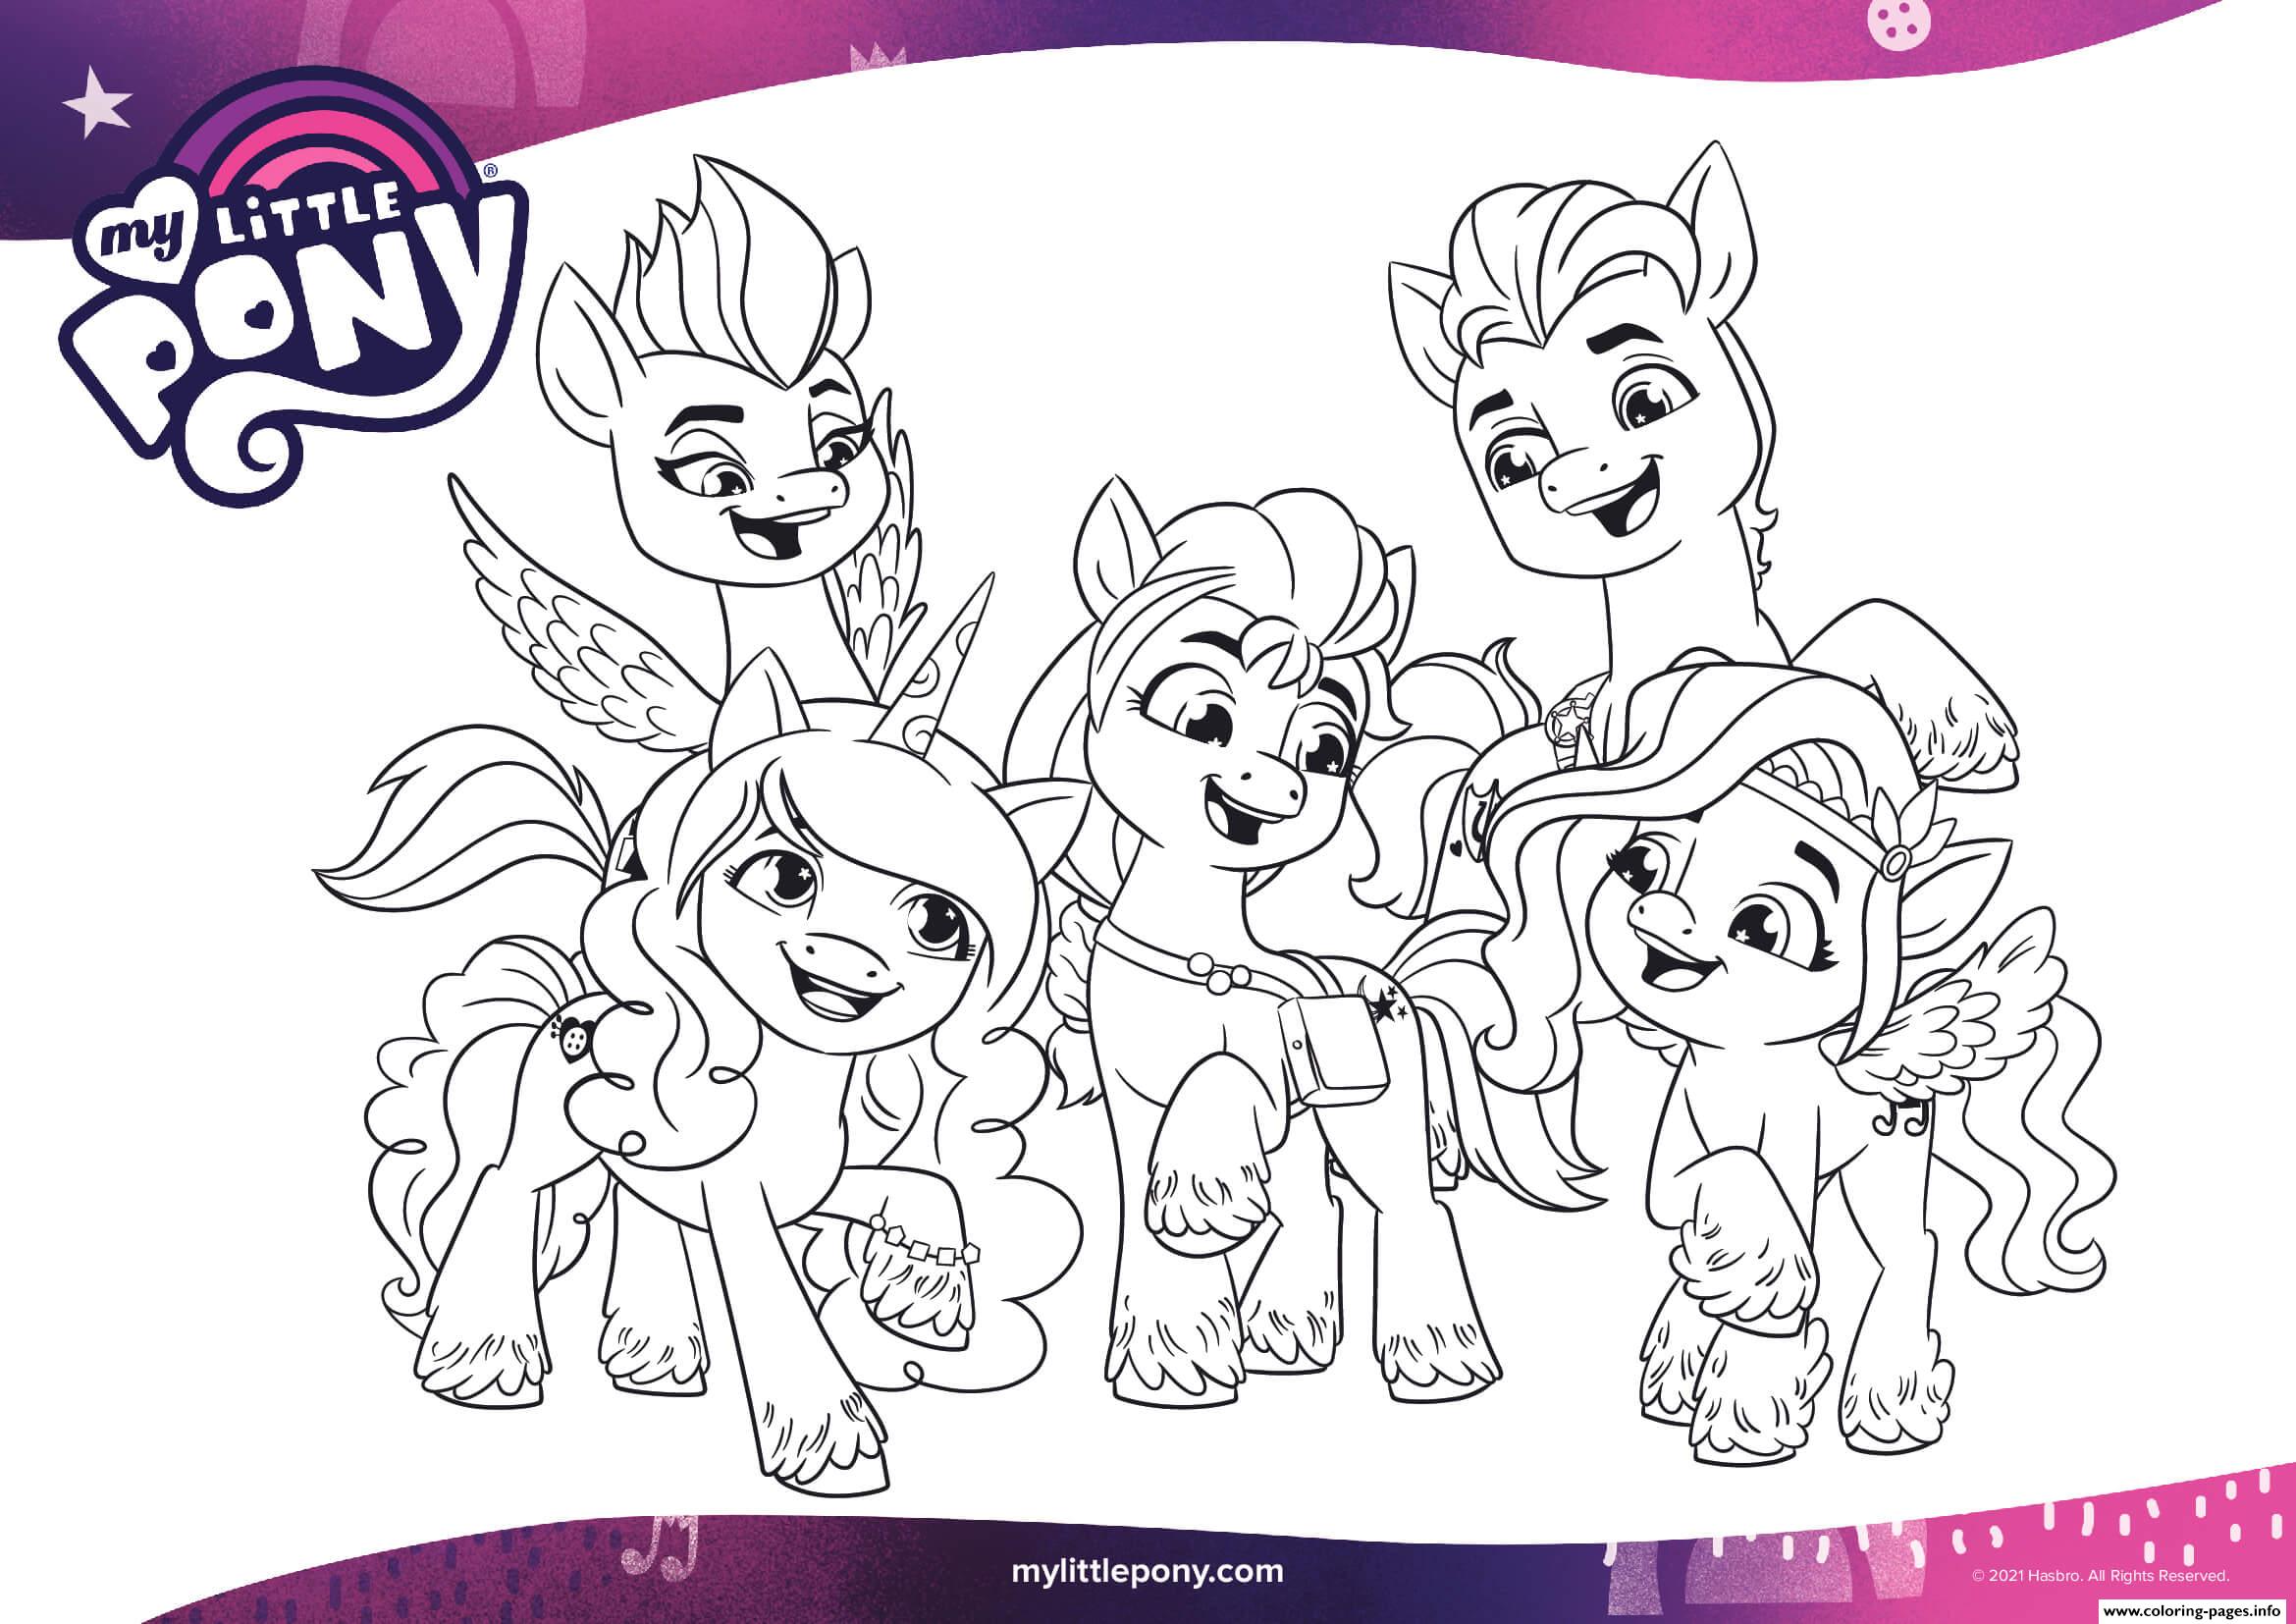 My Little Pony A New Generation Mlp 5 coloring